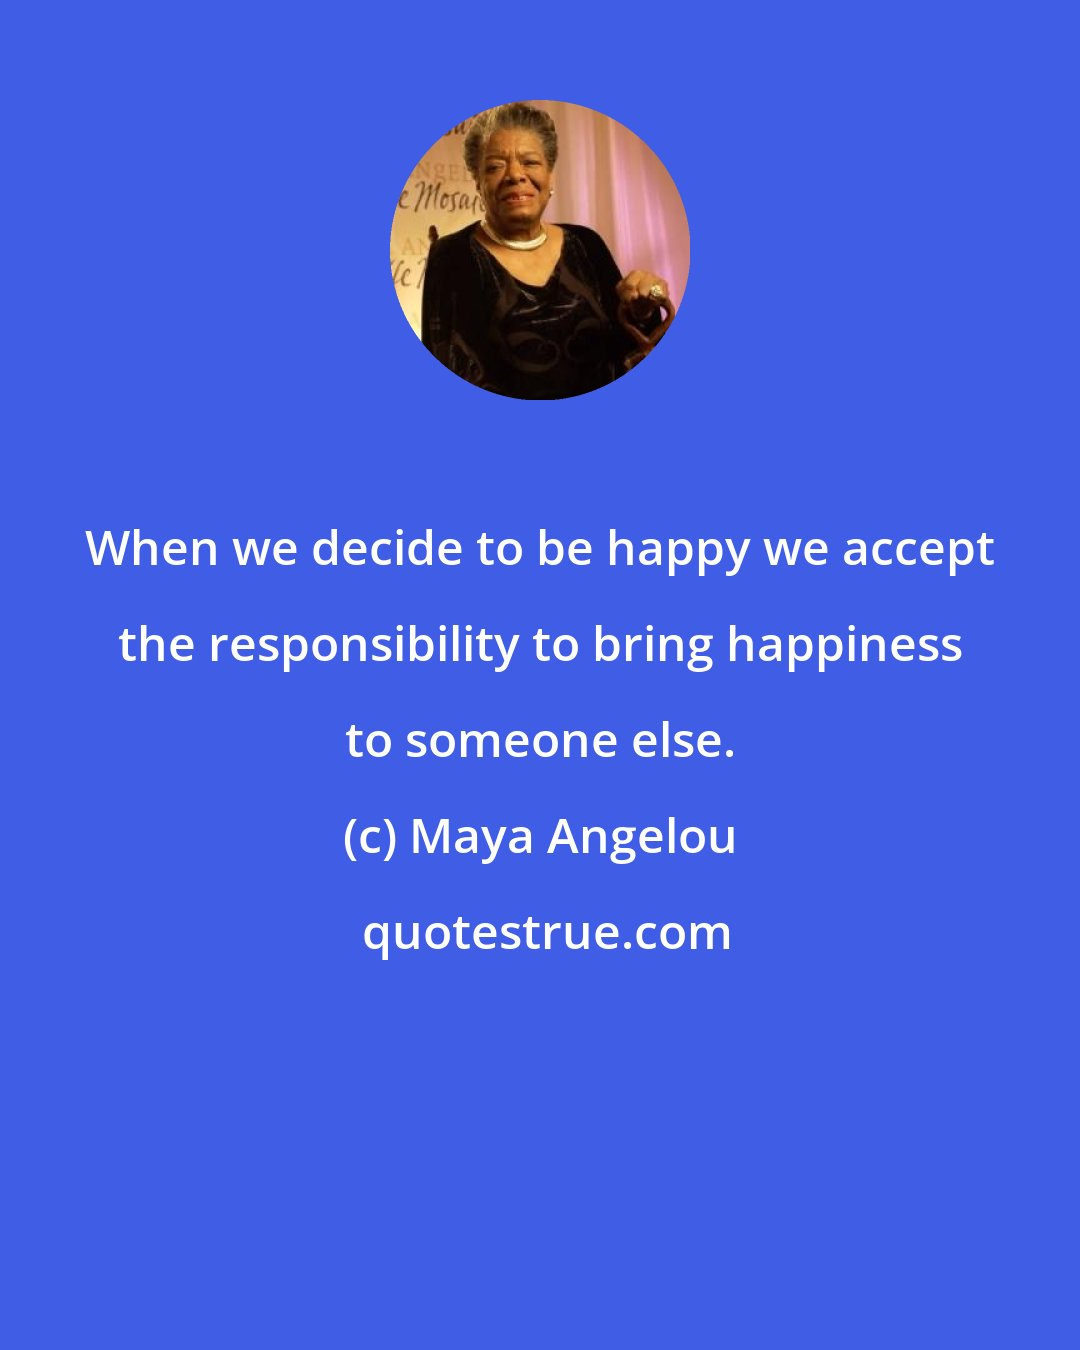 Maya Angelou: When we decide to be happy we accept the responsibility to bring happiness to someone else.